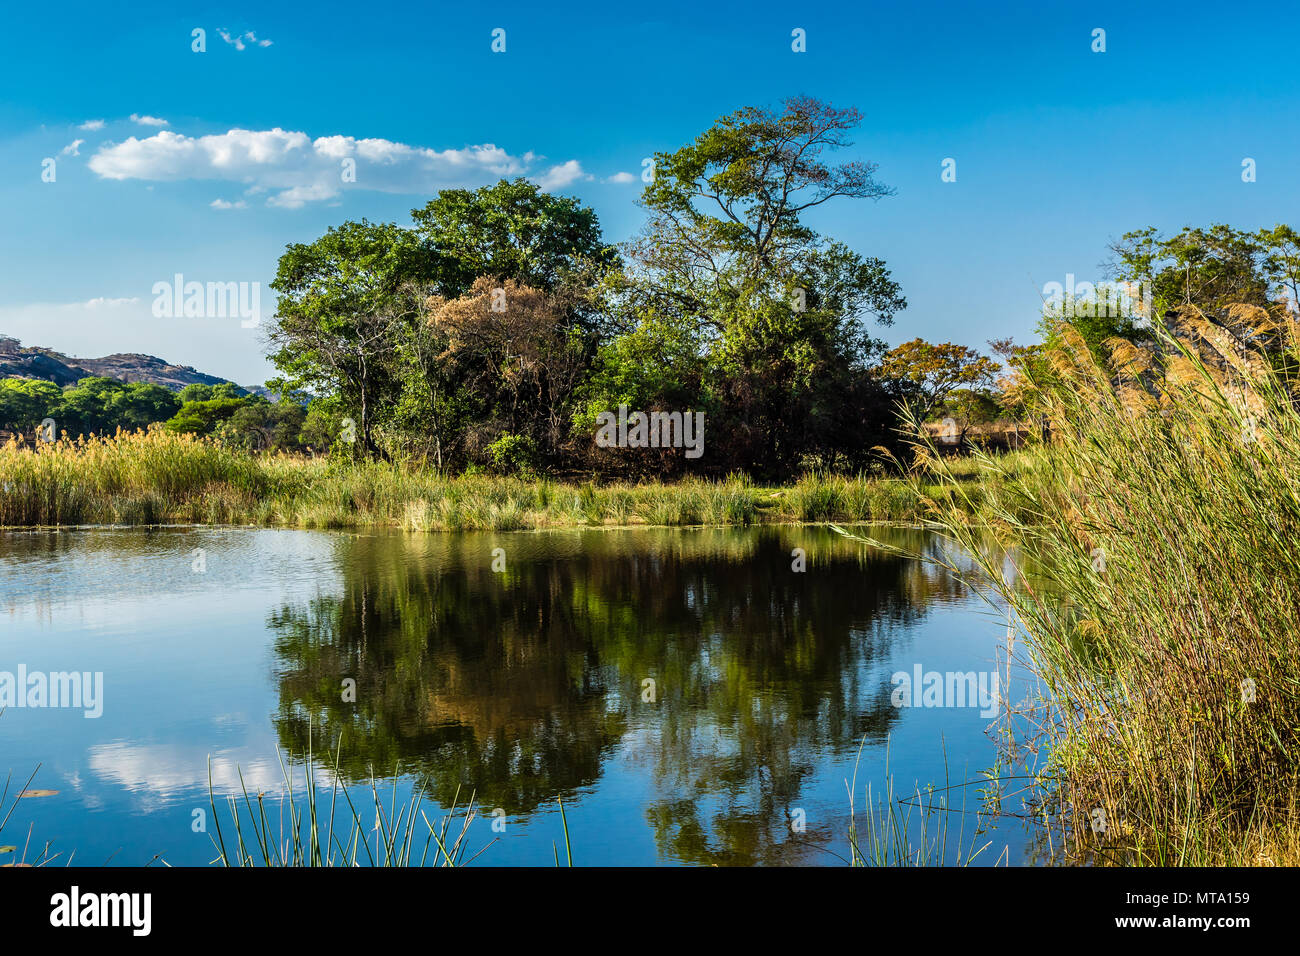 Landscape view of a lake in Headlands, Zimbabwe. October 17, 2016. Stock Photo